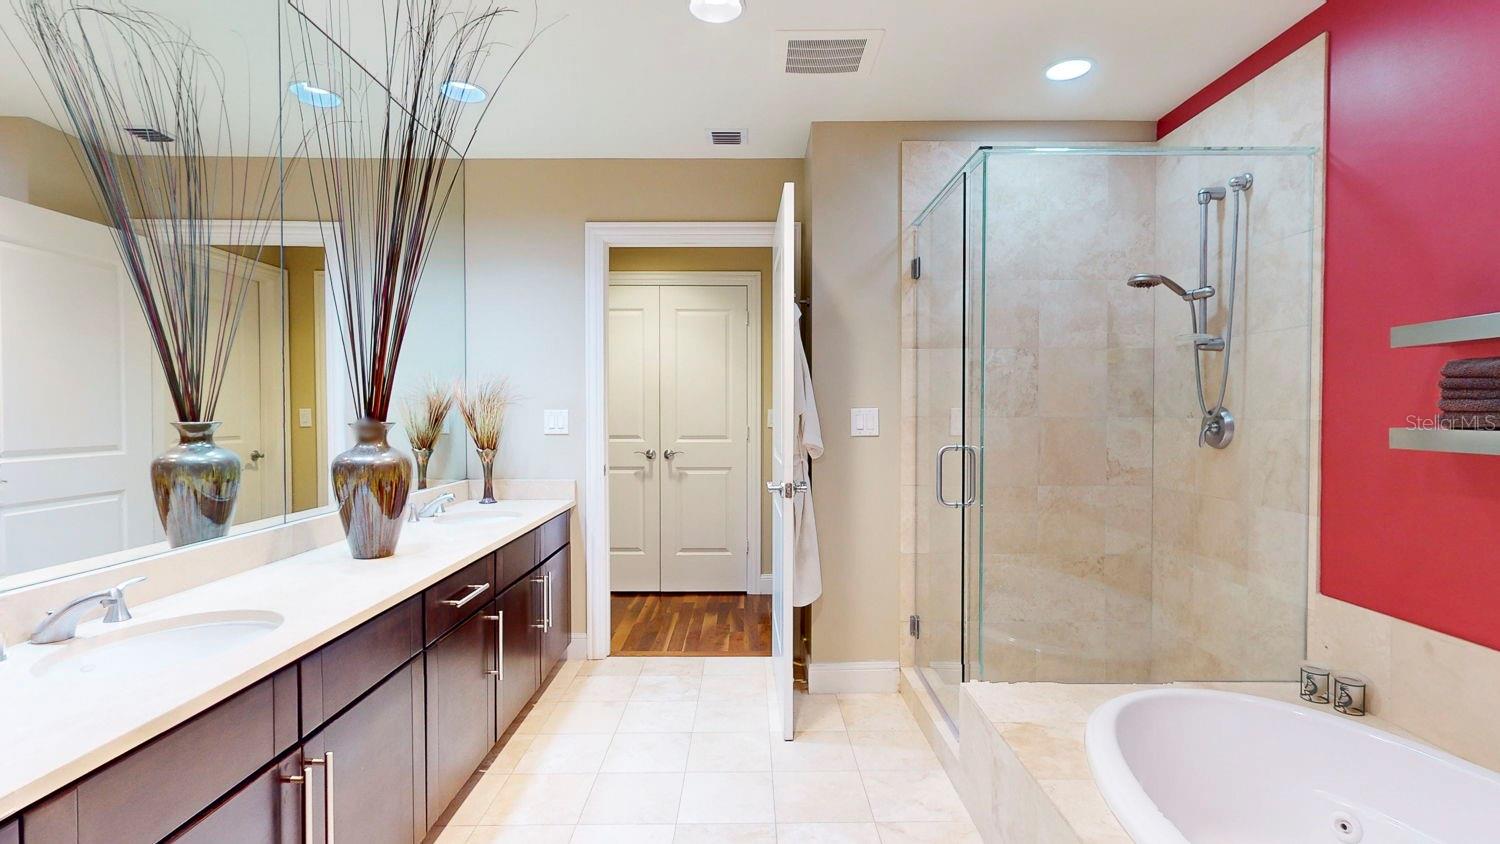 The primary bathroom features both a separate tub and standing shower, providing options for relaxation and rejuvenation.